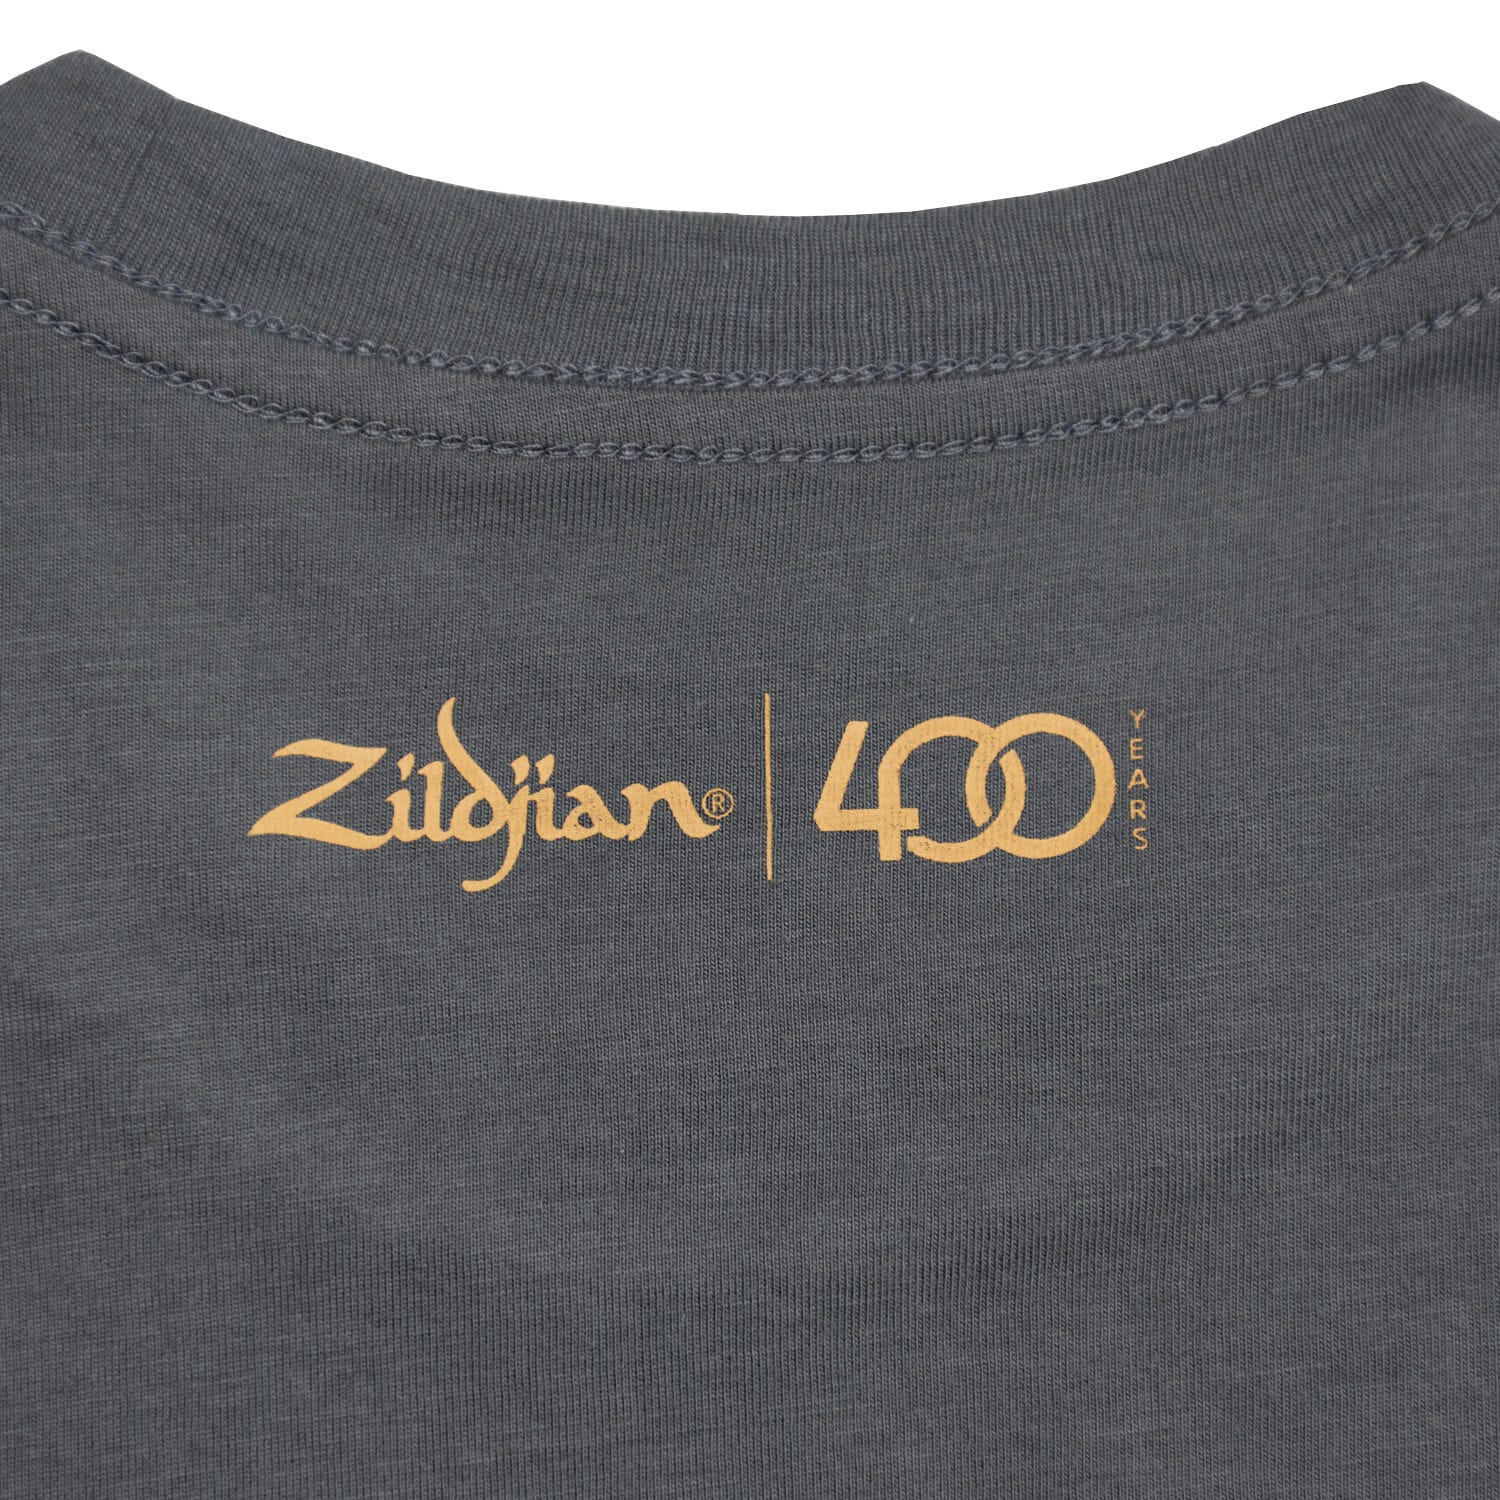 Neck logo of Zildjian Limited Edition 400th Anniversary Classical Tee